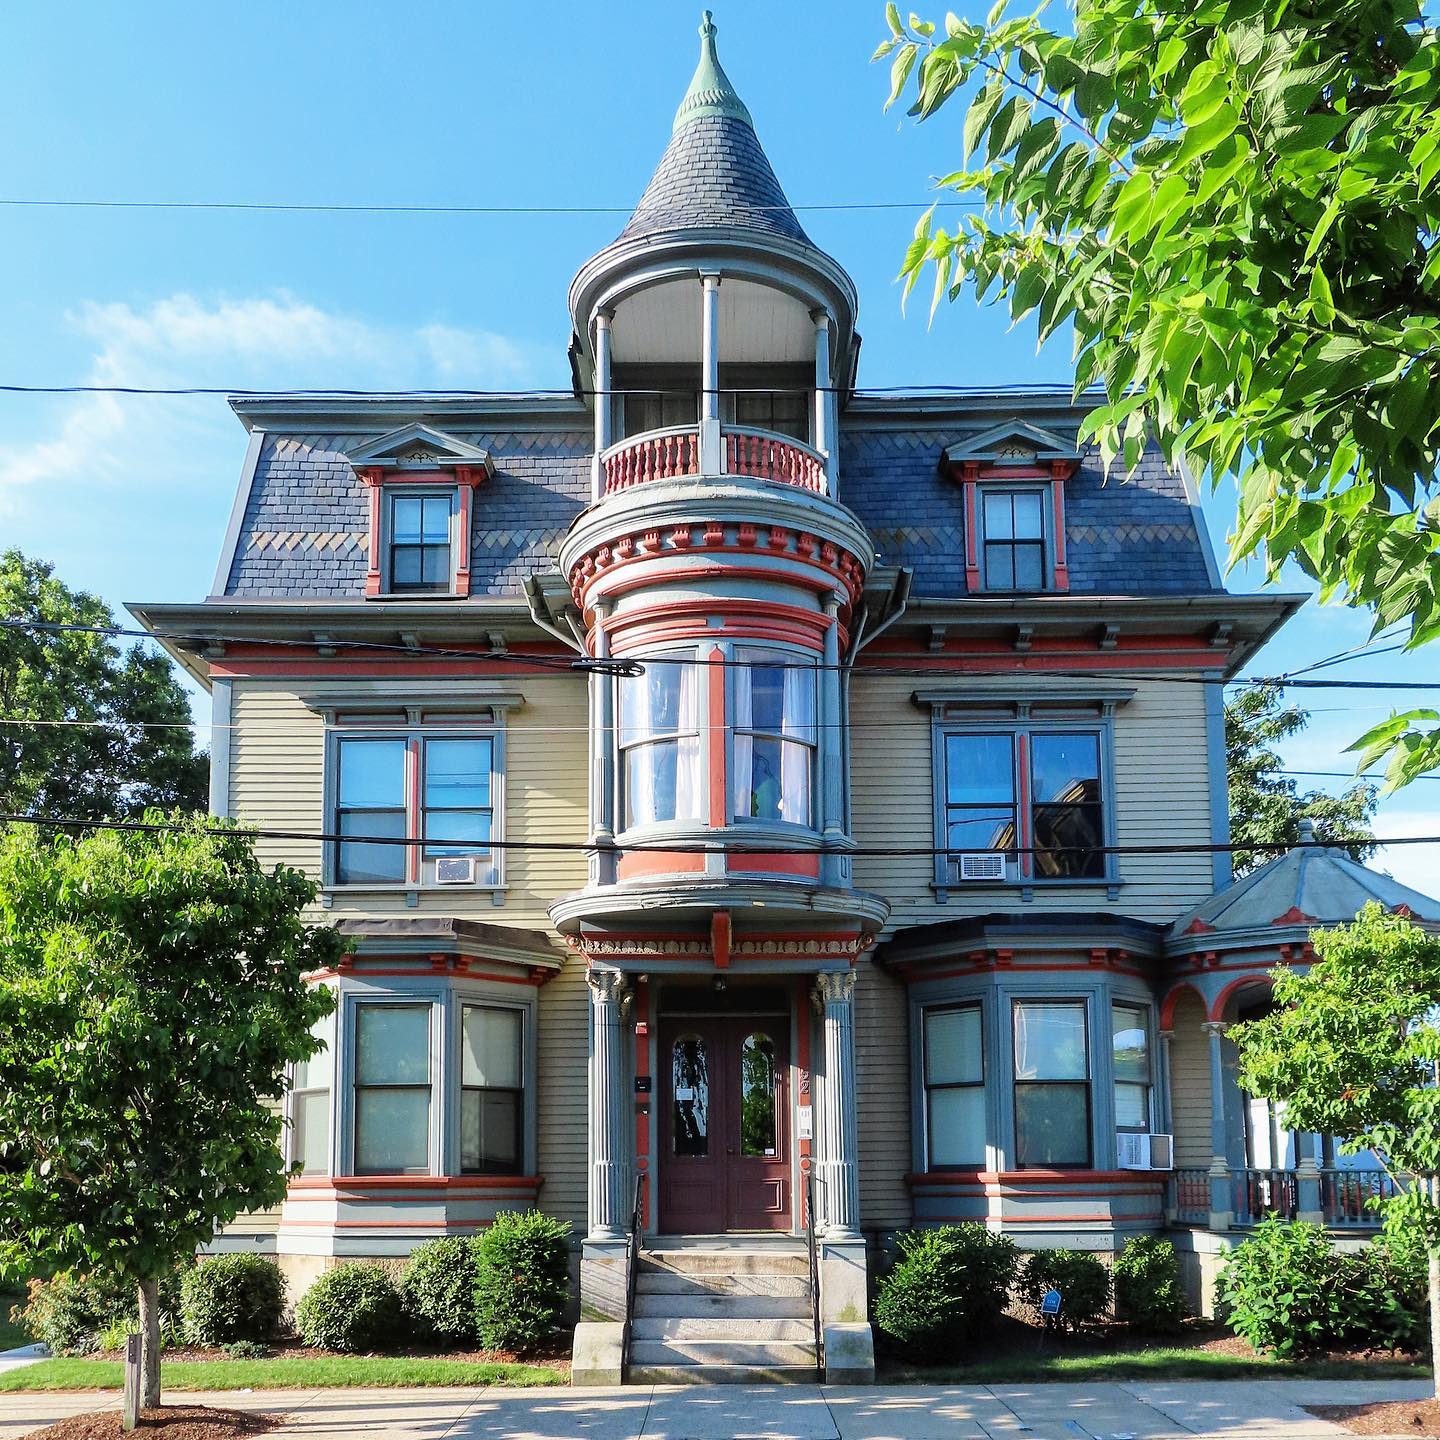 Late Victorian style home located in South Elmwood neighborhood in Providence, RI. Photo by Instagram user @_jhogarty_____